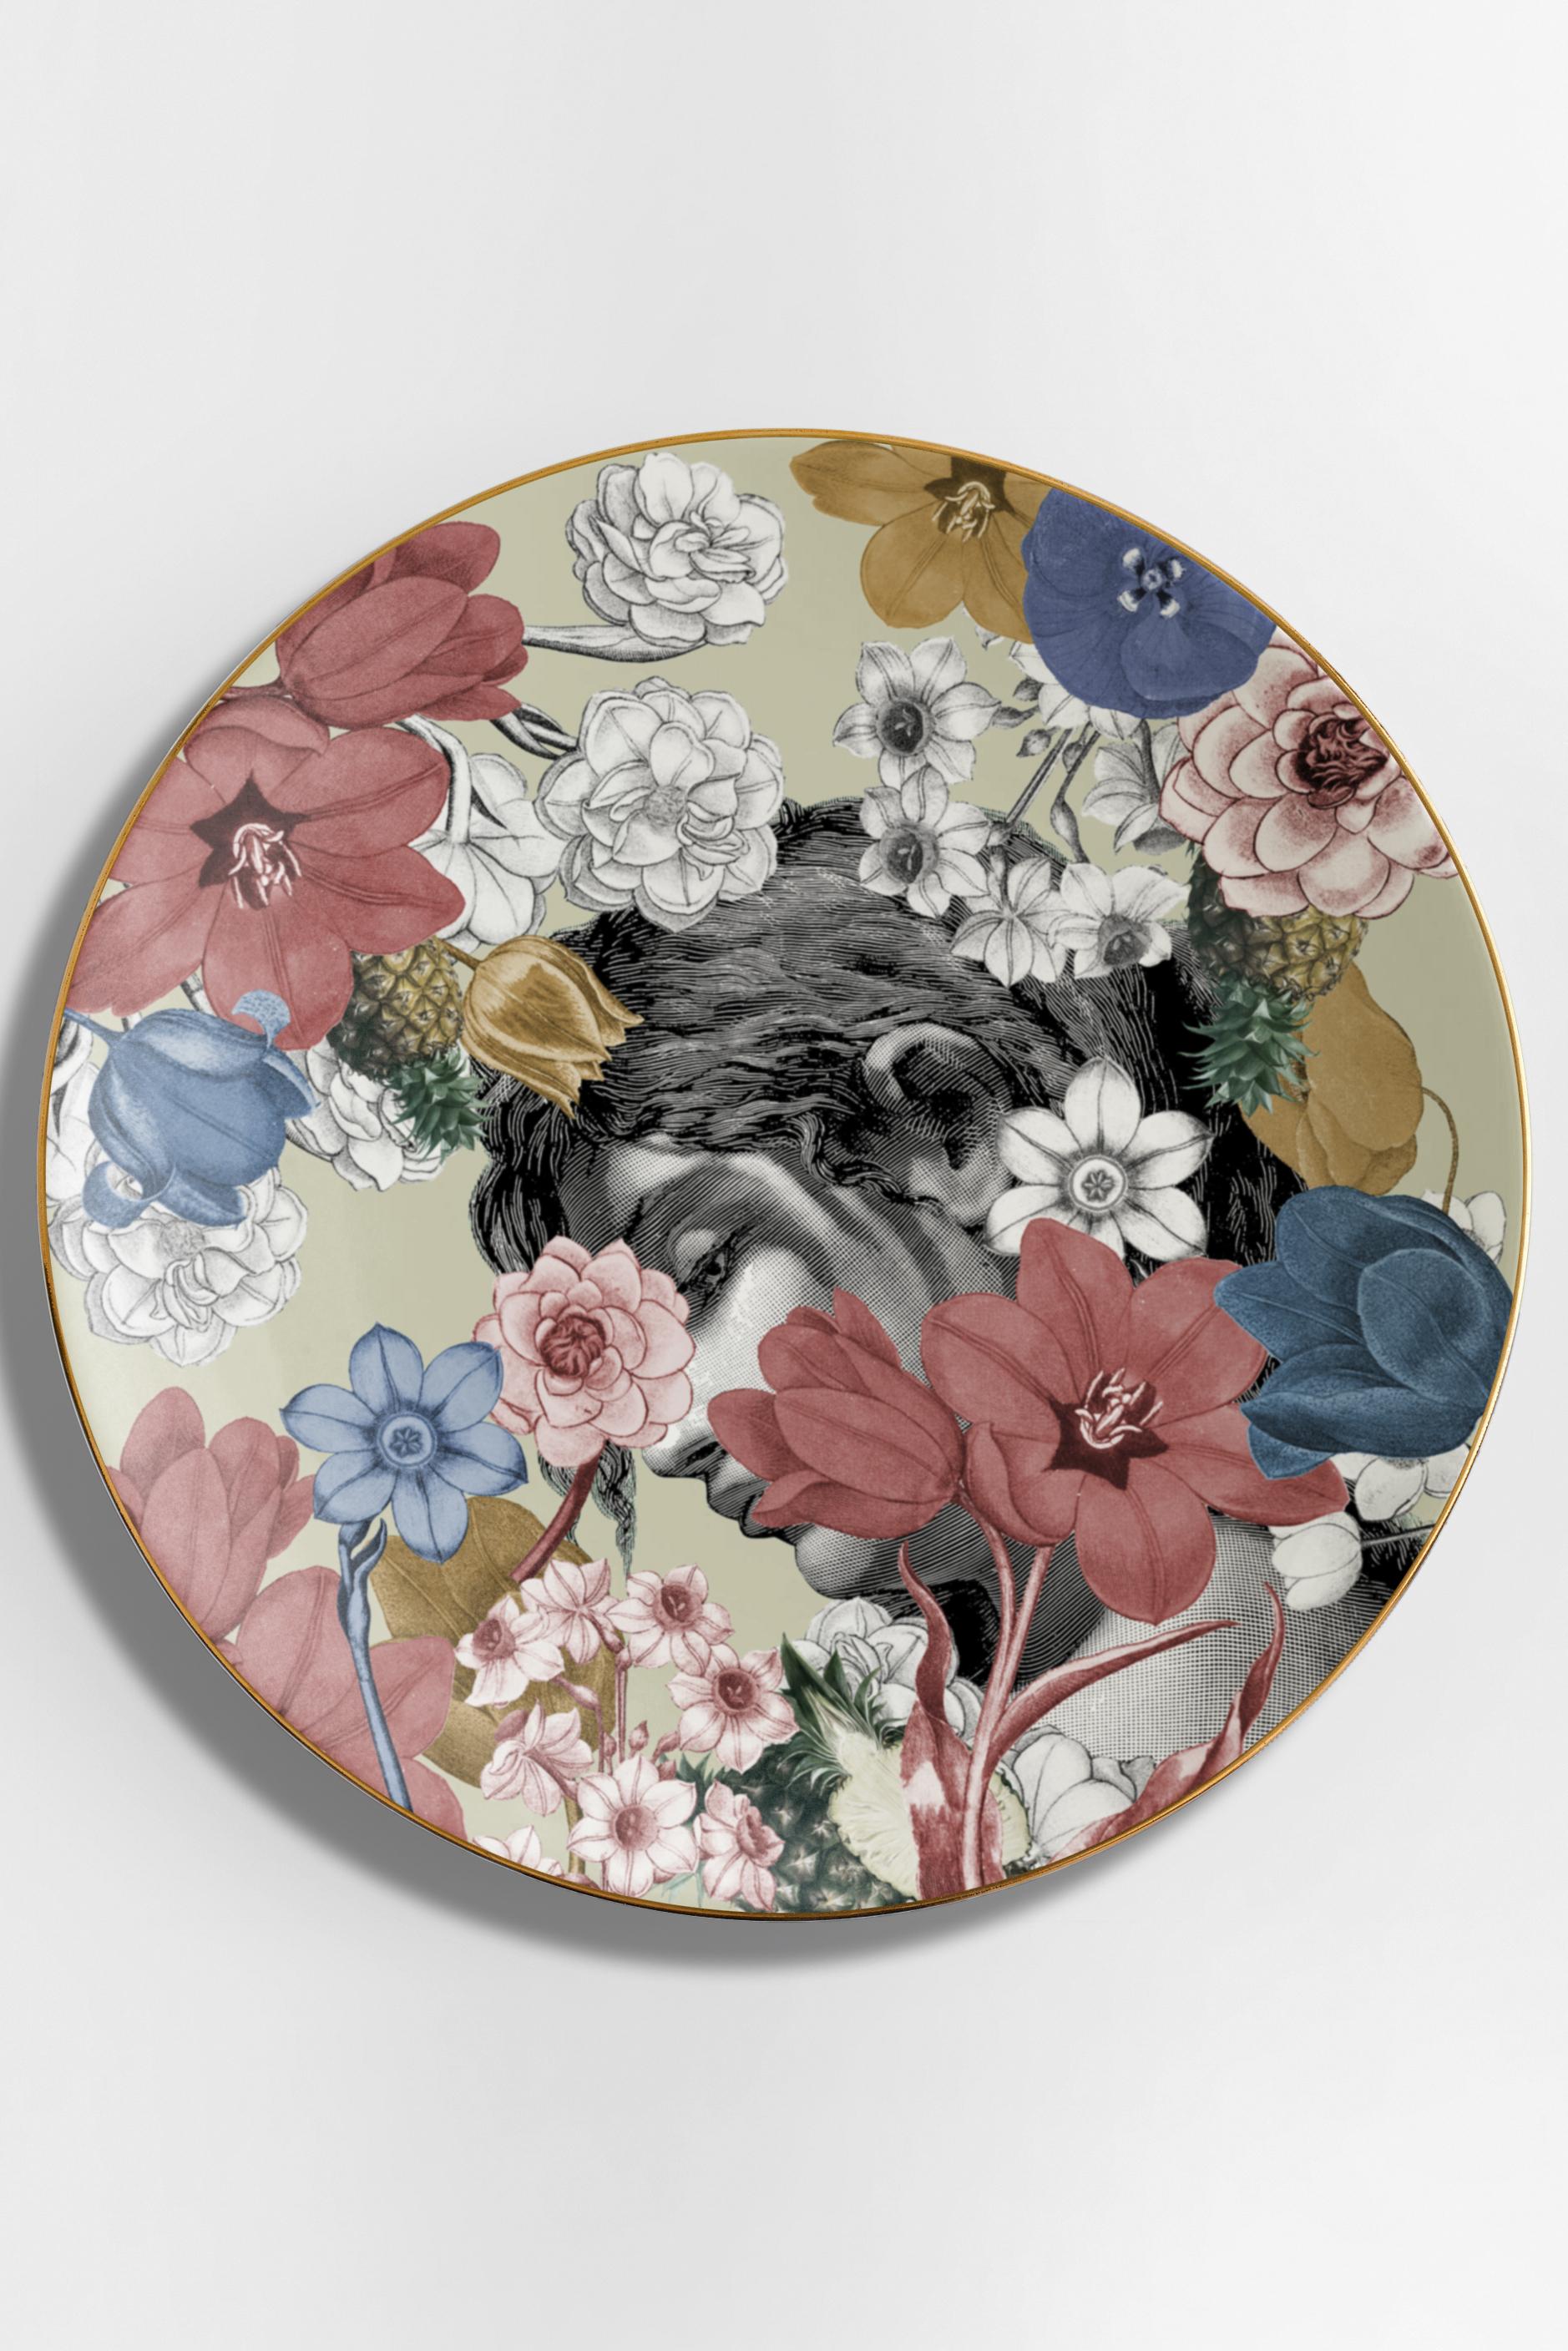 A pensive Berber woman, depicted in black and white while she boasts her traditional headpiece and jewelry with an expression of proud strength on her face, is the protagonist of this dinner plate in porcelain, part of the Cairo collection. All